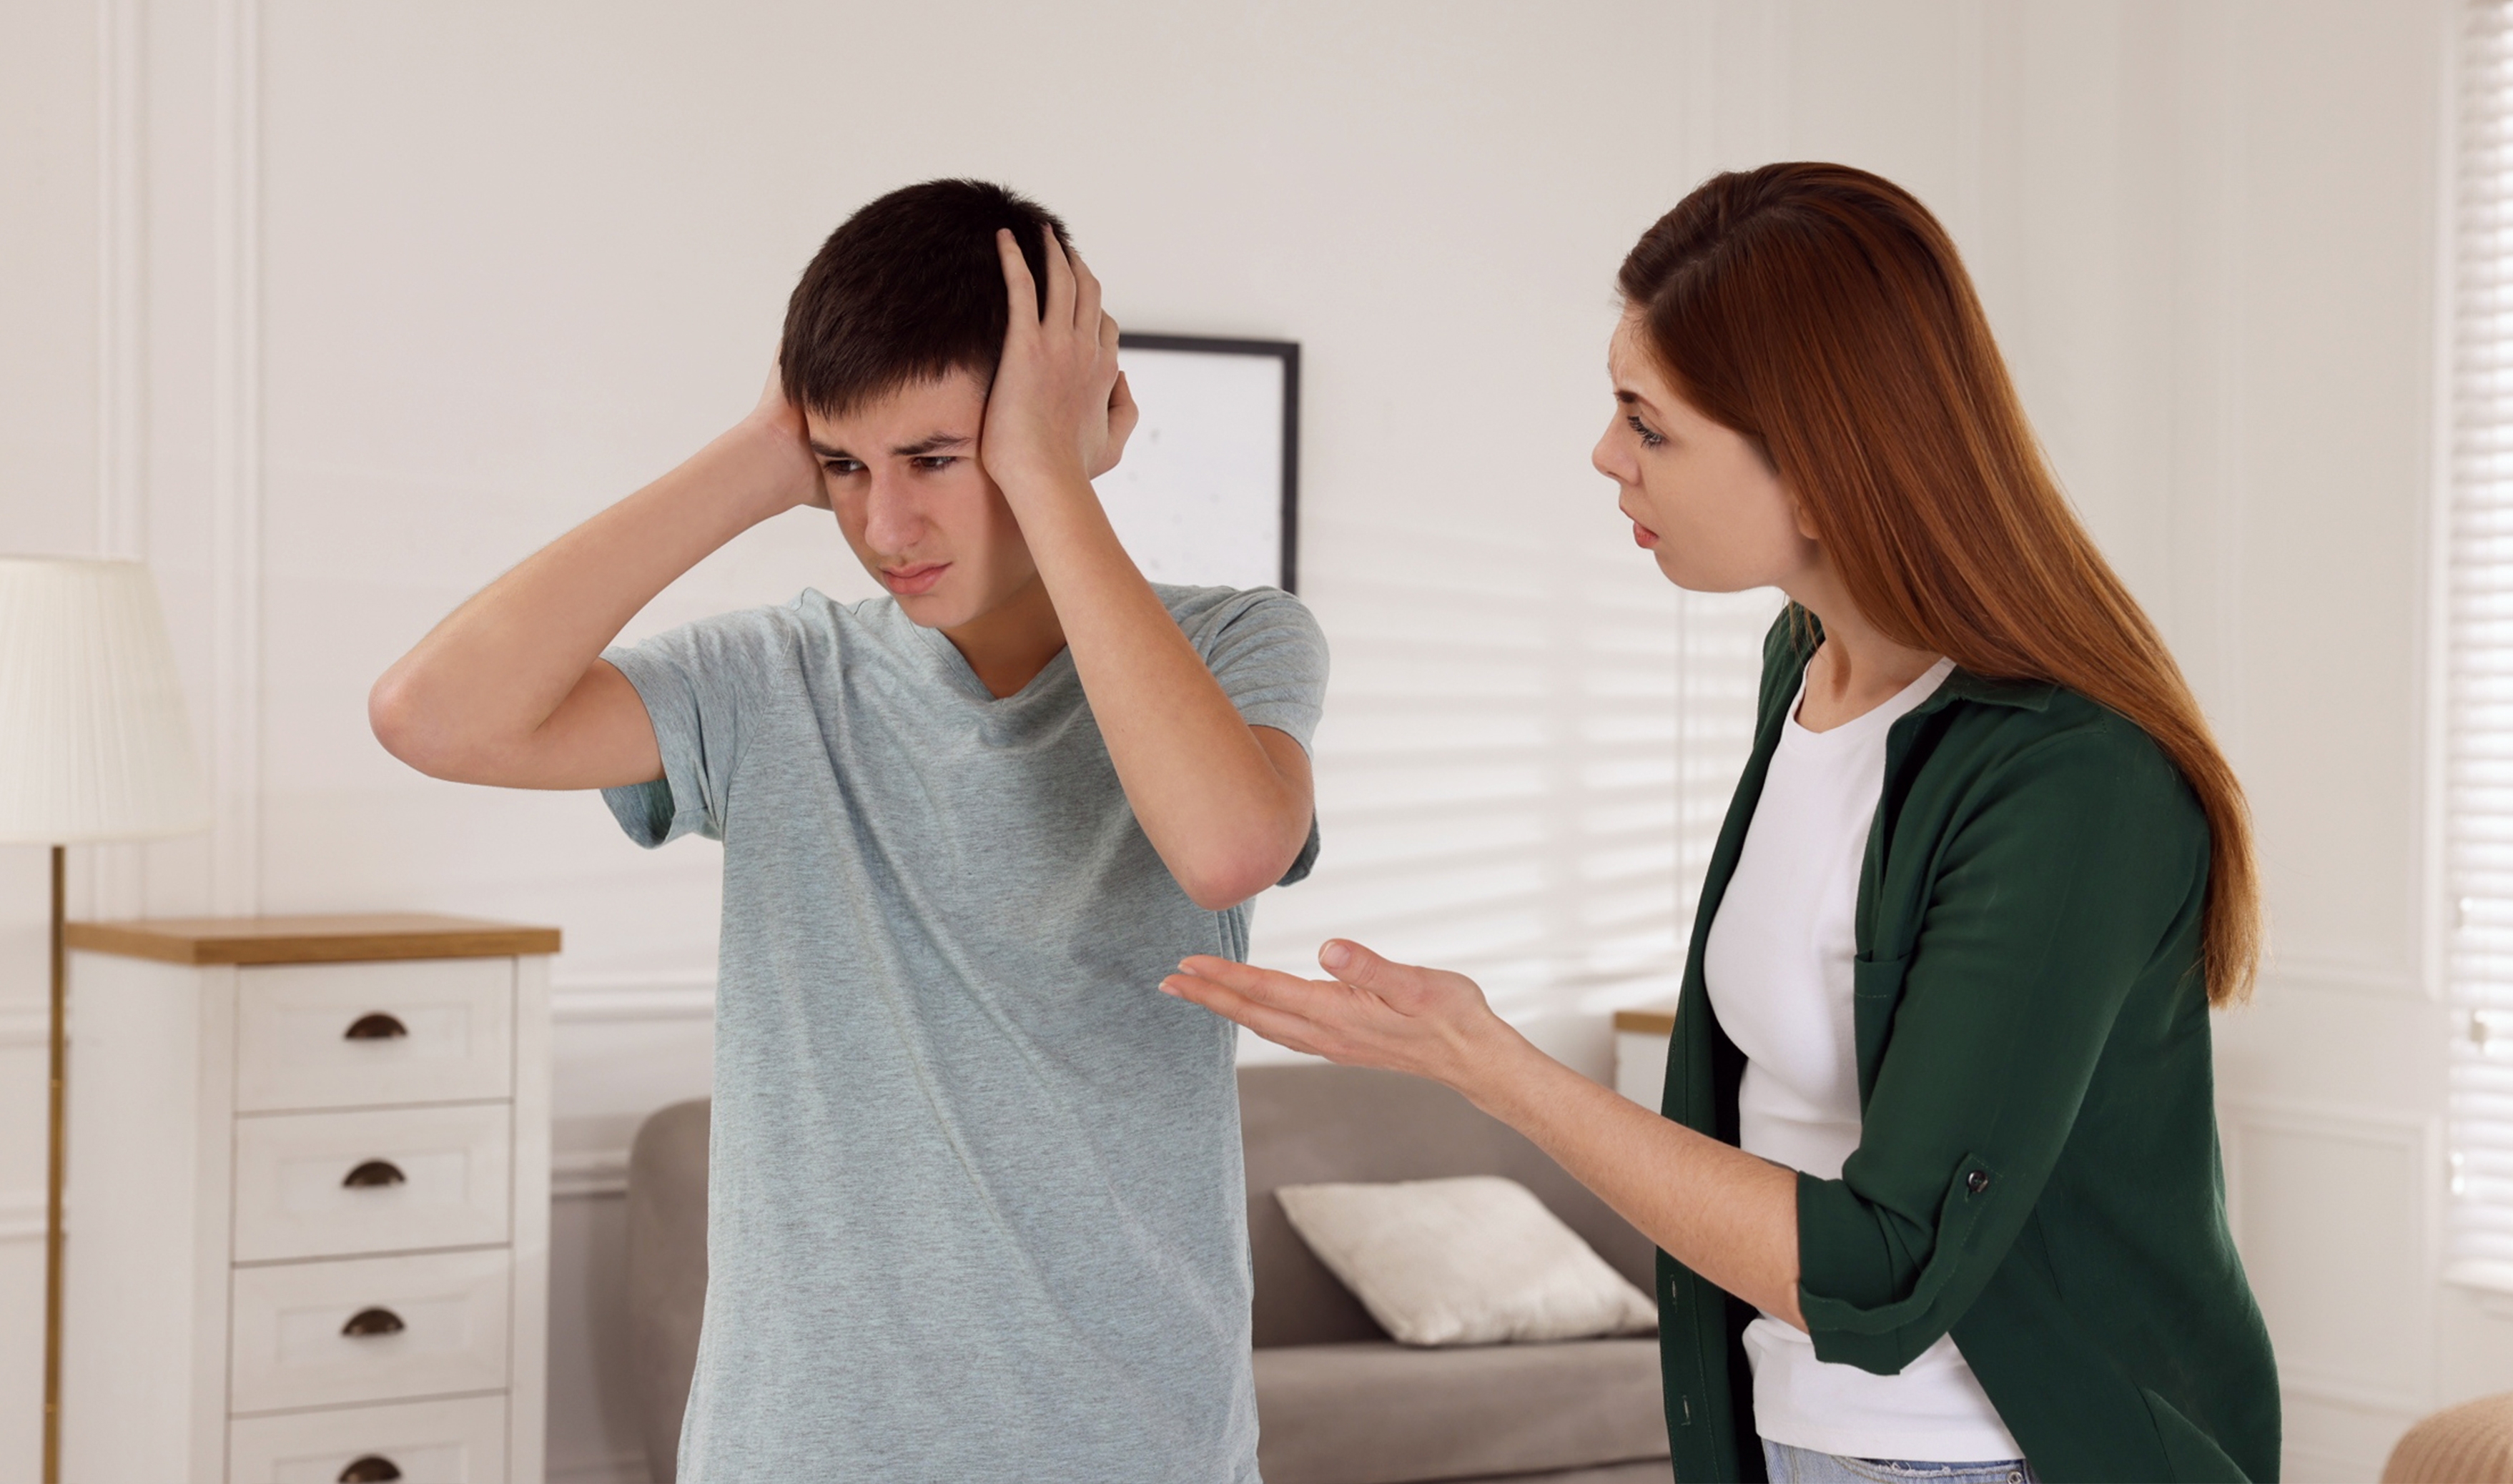 A woman scolding her son as he covers his ears | Source: Shutterstock